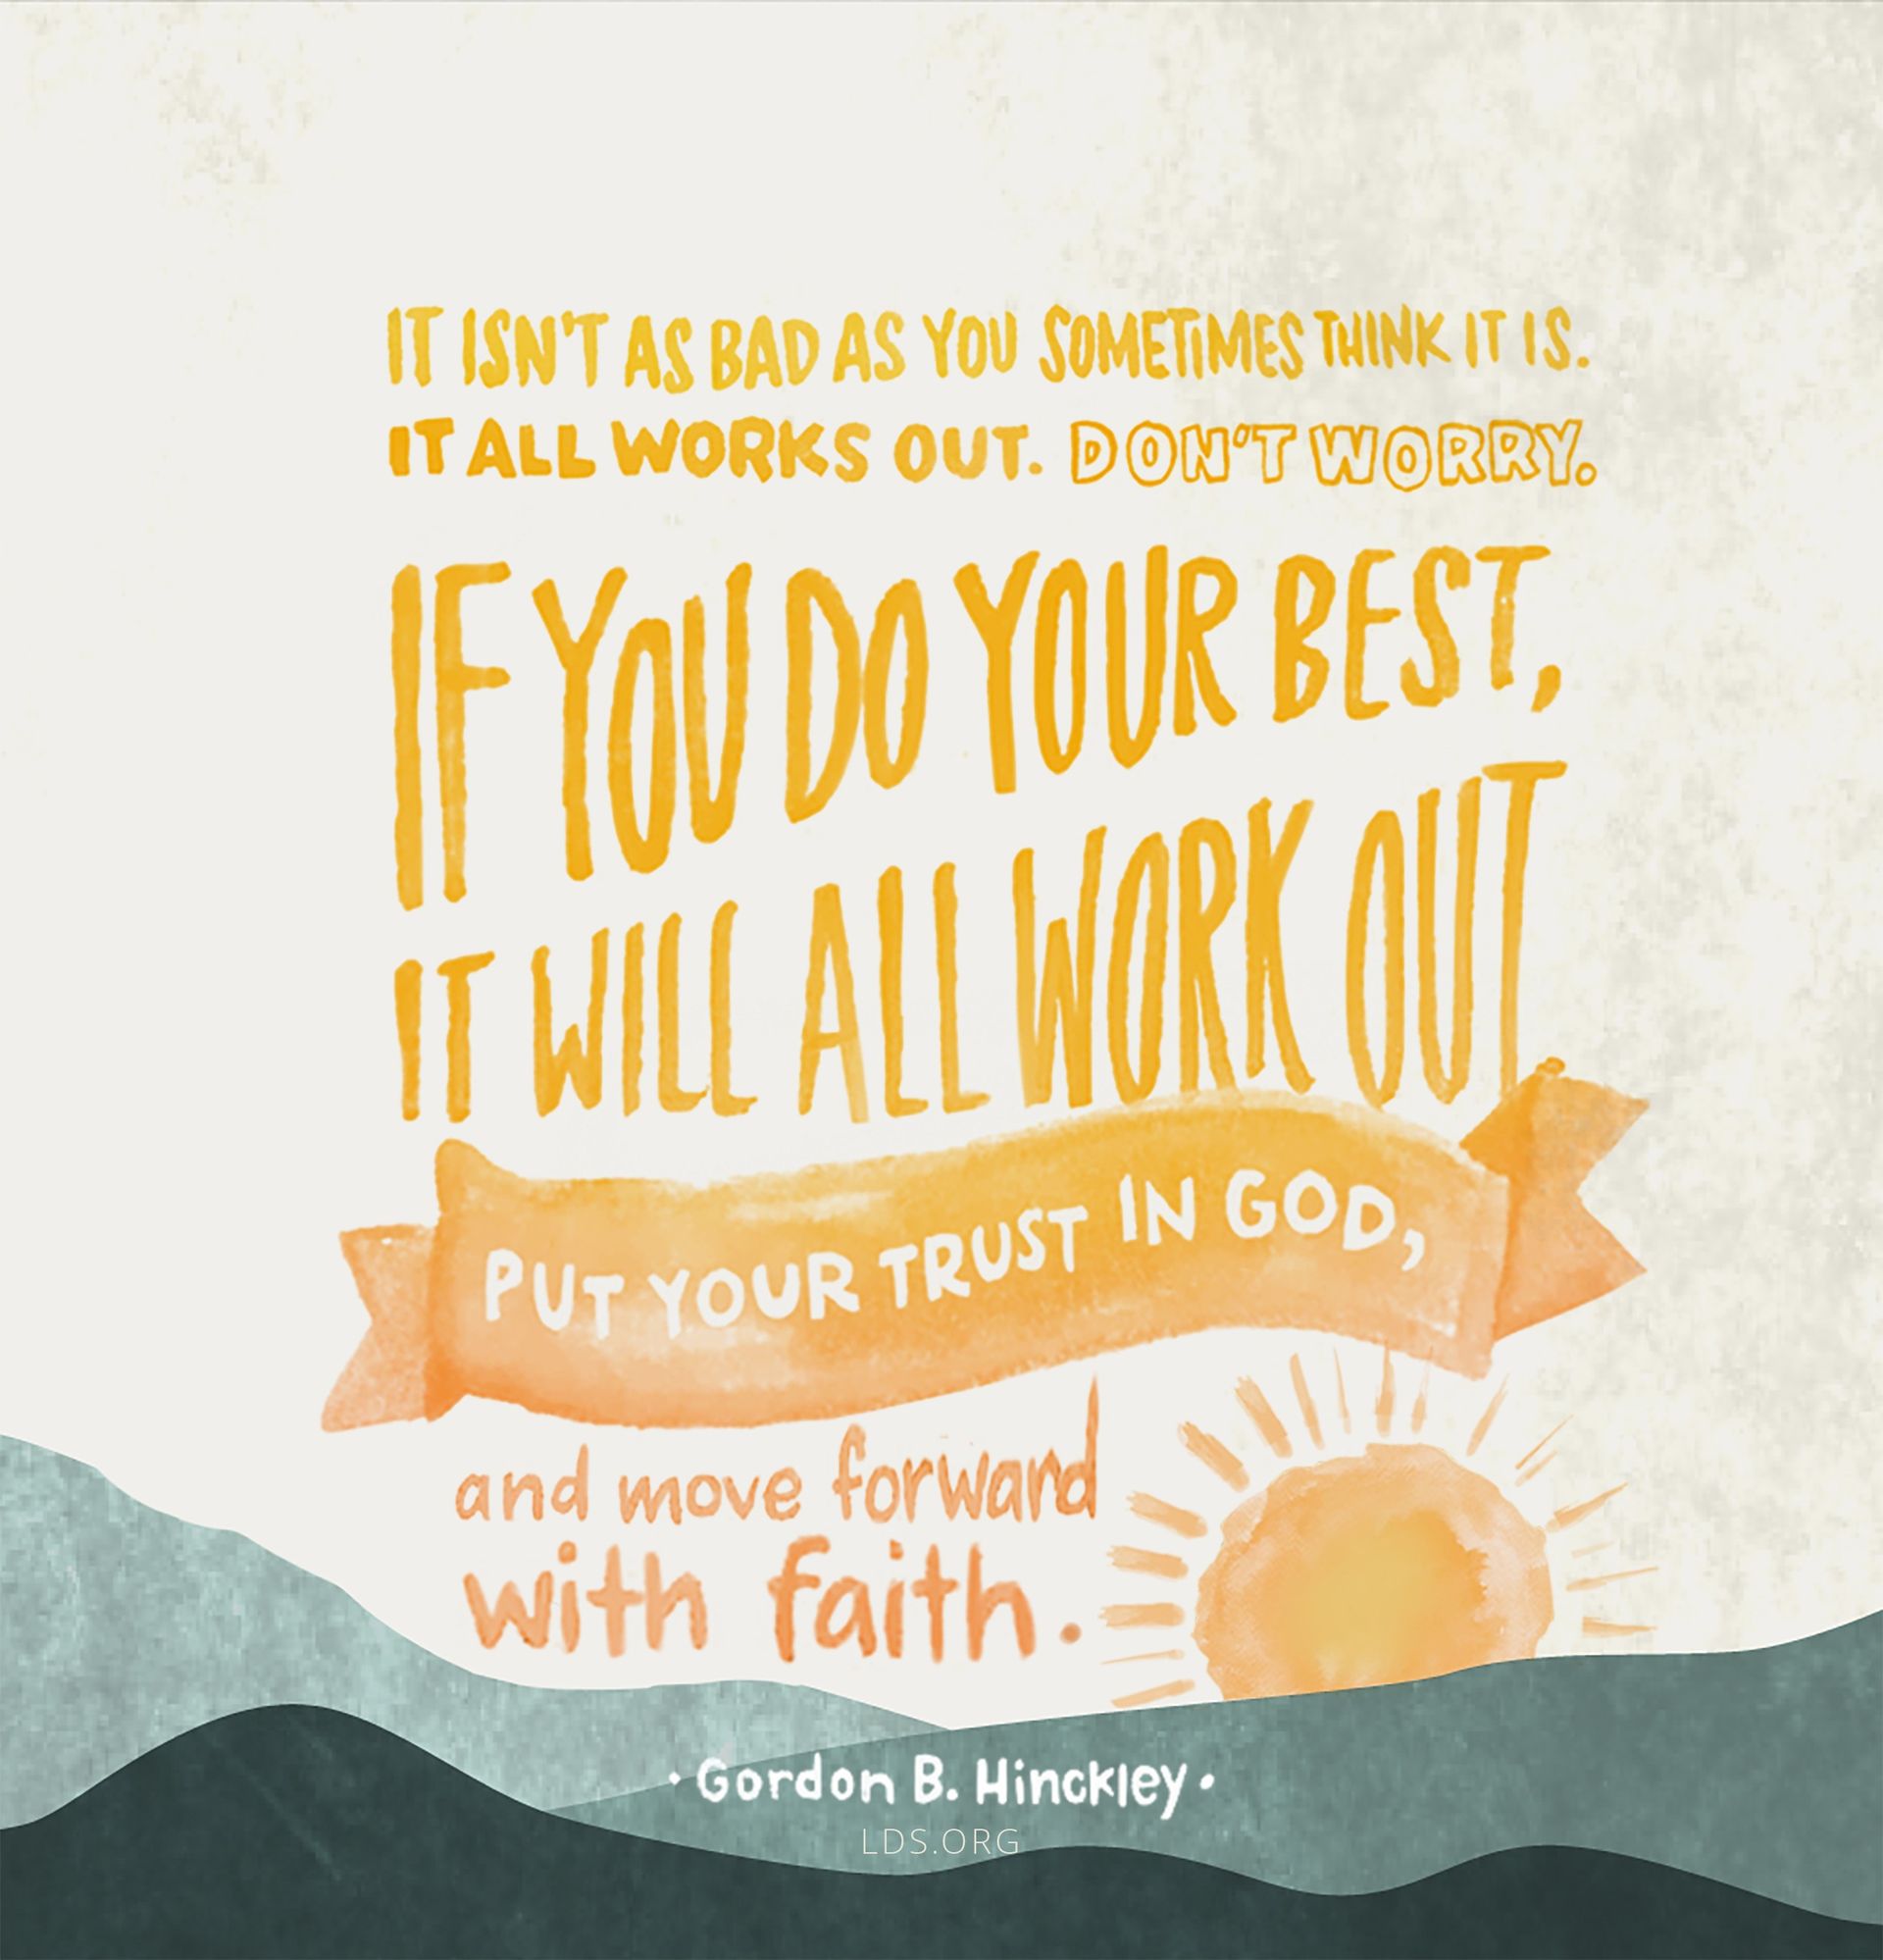 “It isn’t as bad as you sometimes think it is. It all works out. Don’t worry. … If you do your best, it will all work out. Put your trust in God, and move forward with faith.”—President Gordon B. Hinckley, “Latter-day Counsel: Excerpts from Addresses of President Gordon B. Hinckley”